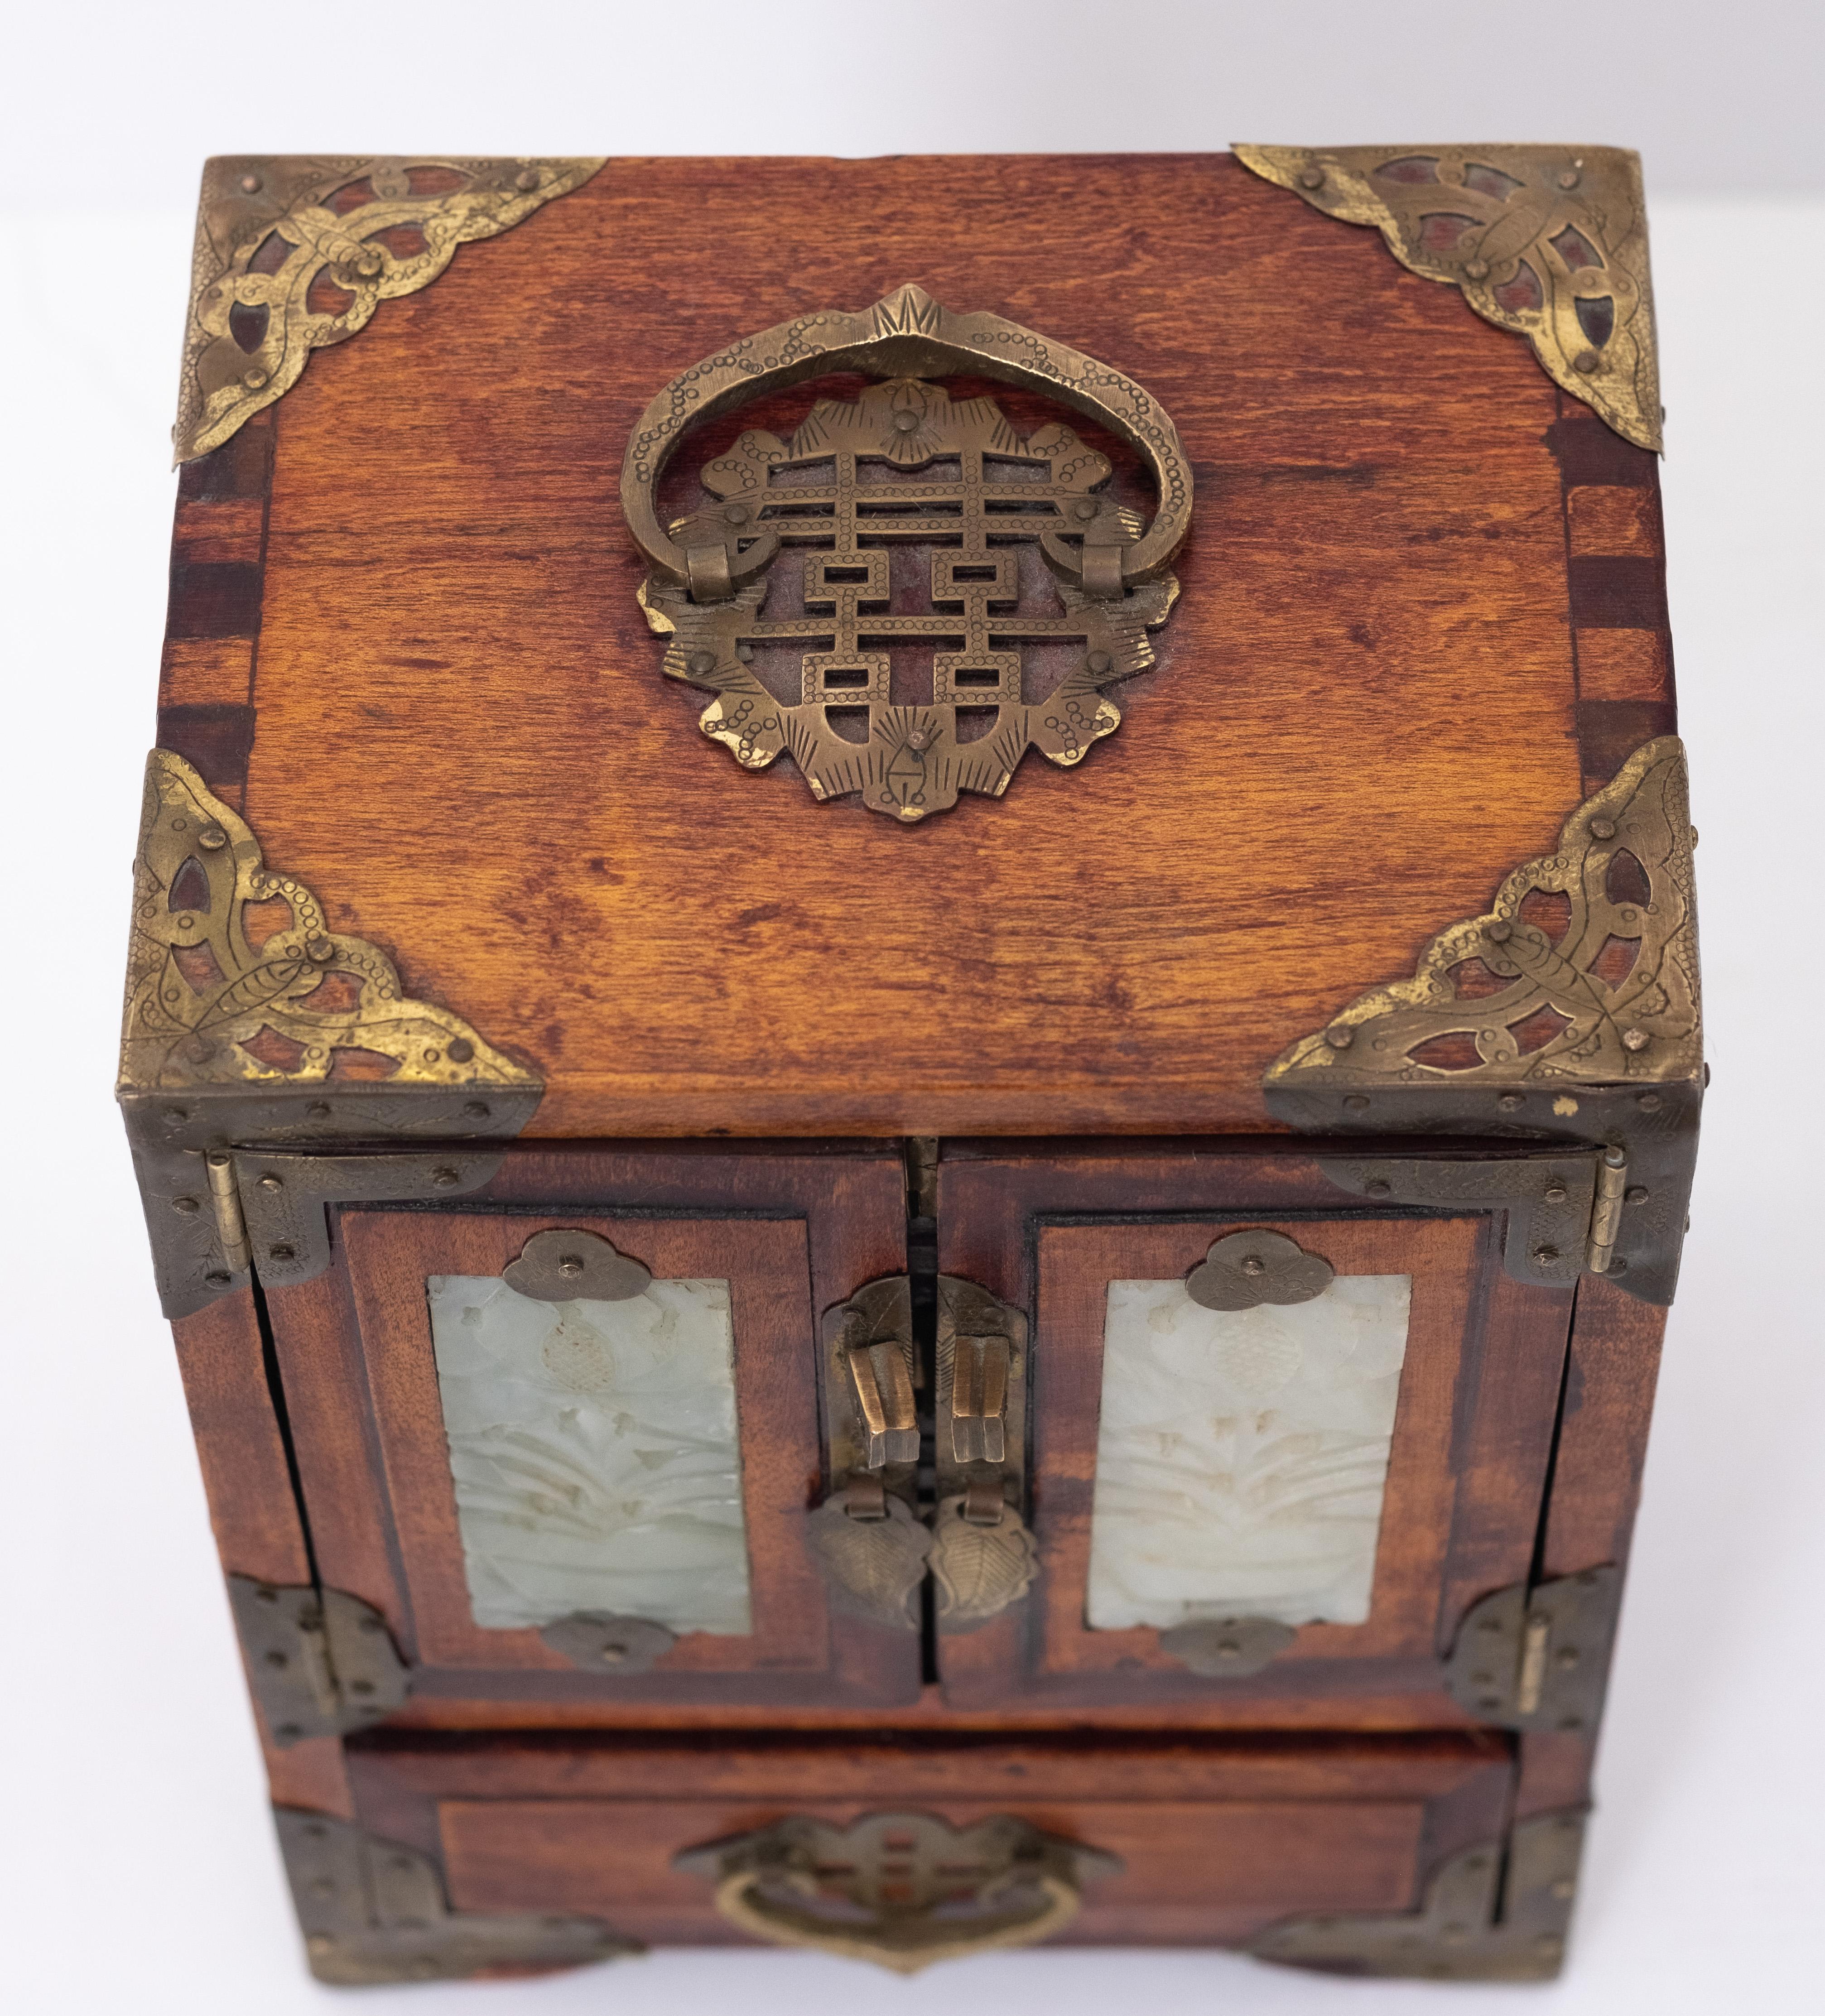 Beautiful Chinese jewelry box. Wood with brass and jade details. Original key 
inside three little drawers, with red Silk upholstery and place for your rings and bracelets. In the drawer beneath a hidden inlay tray. Lovely piece.  1960s.
 